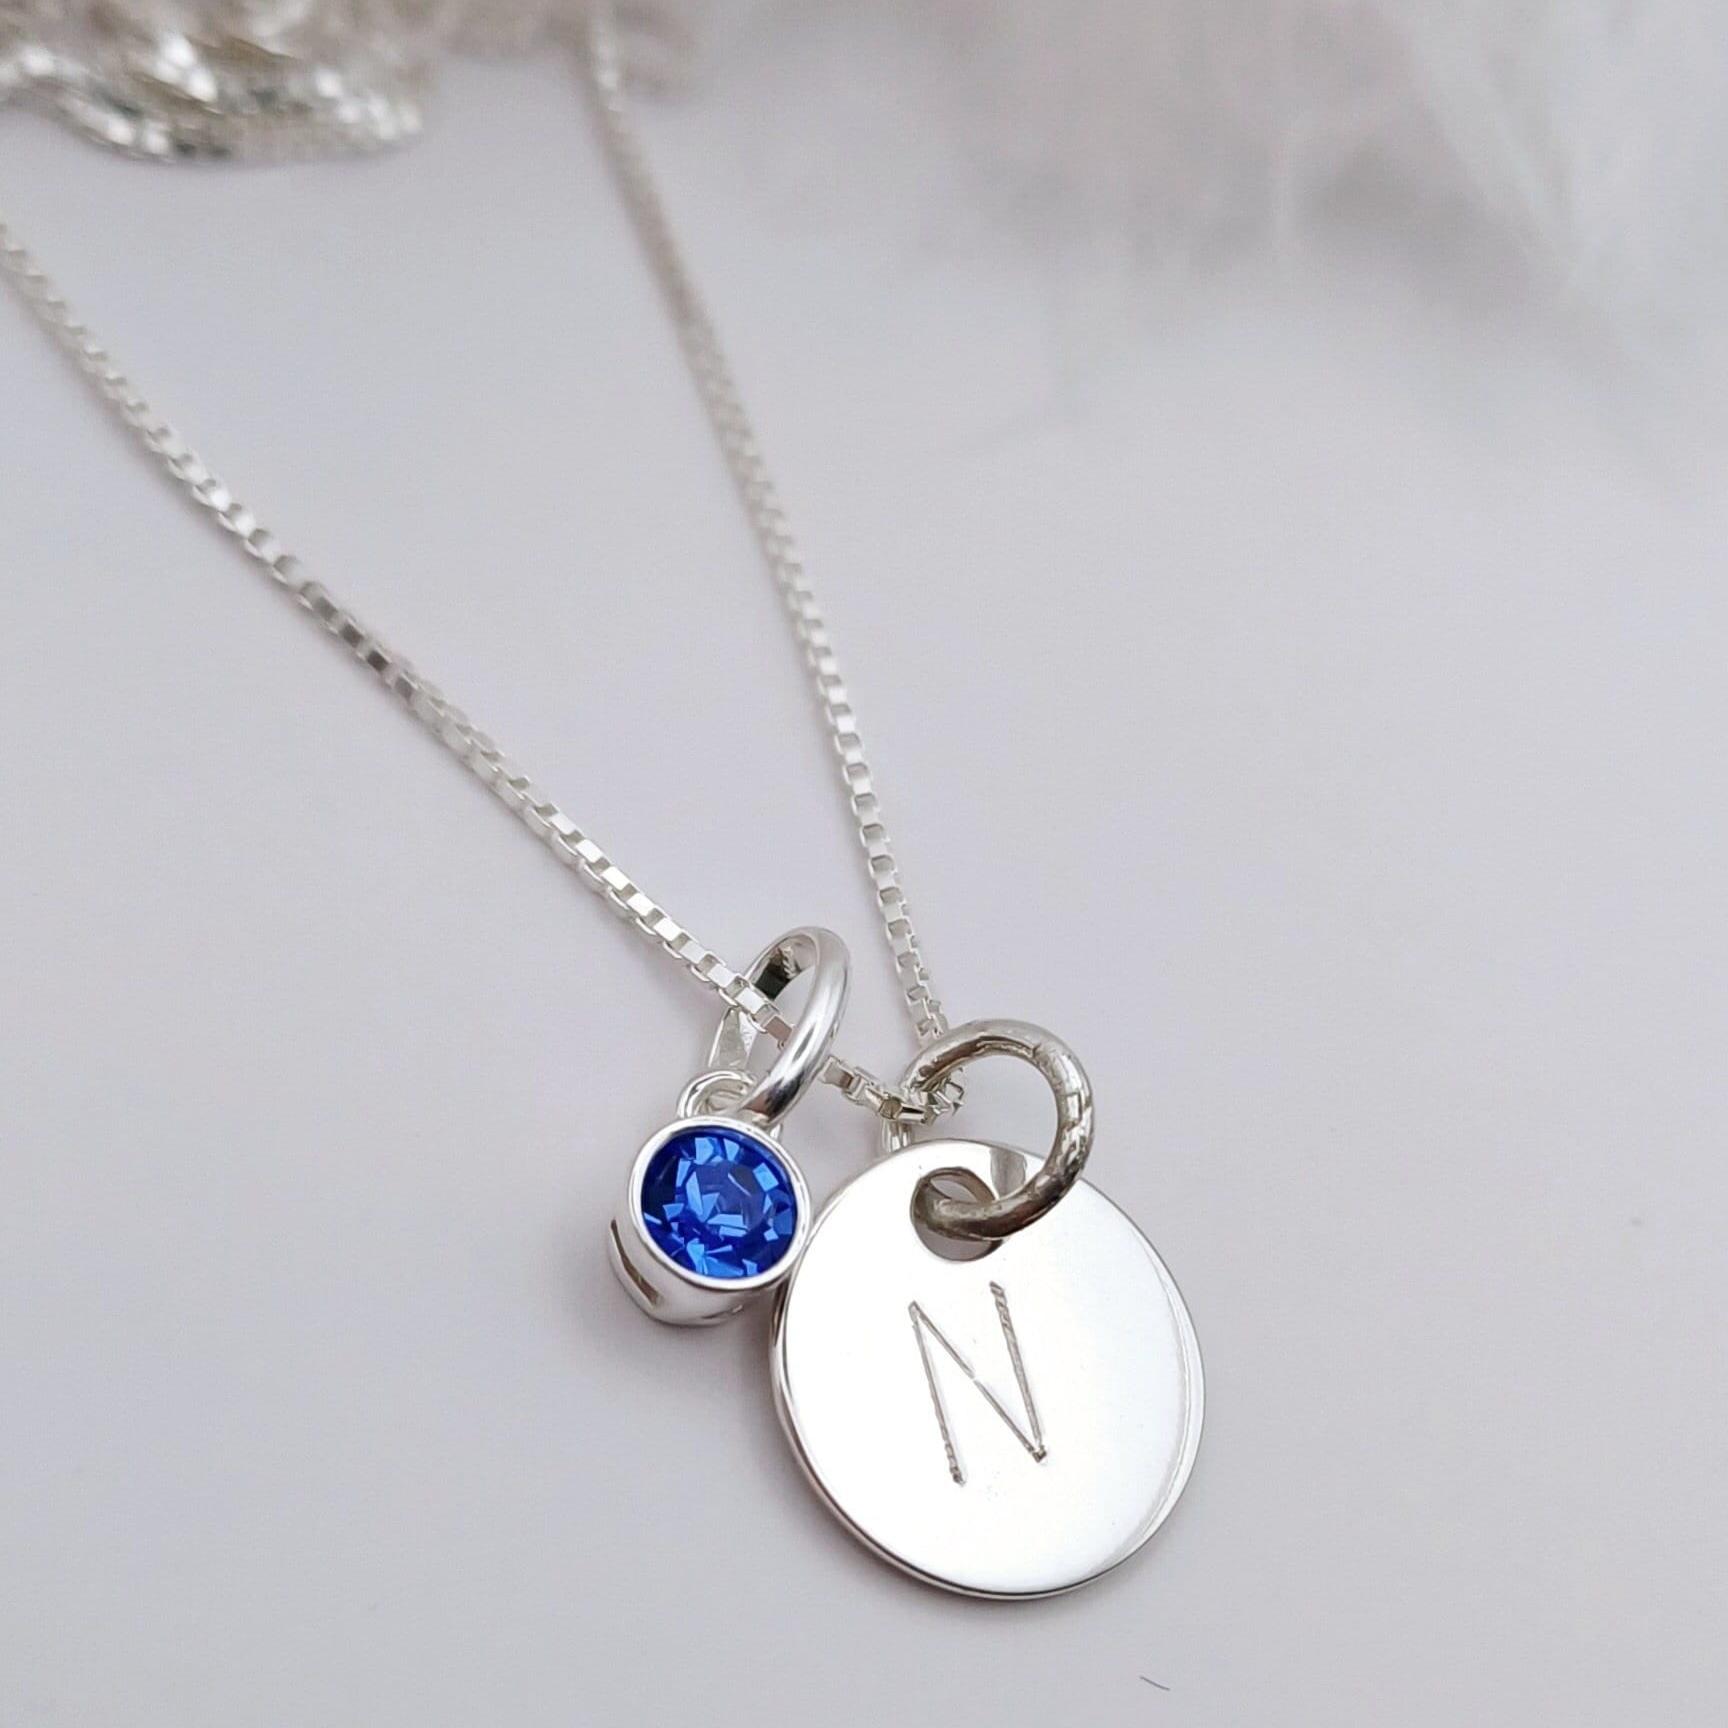 NECKLACES - Silver Initial Birthstone Necklace